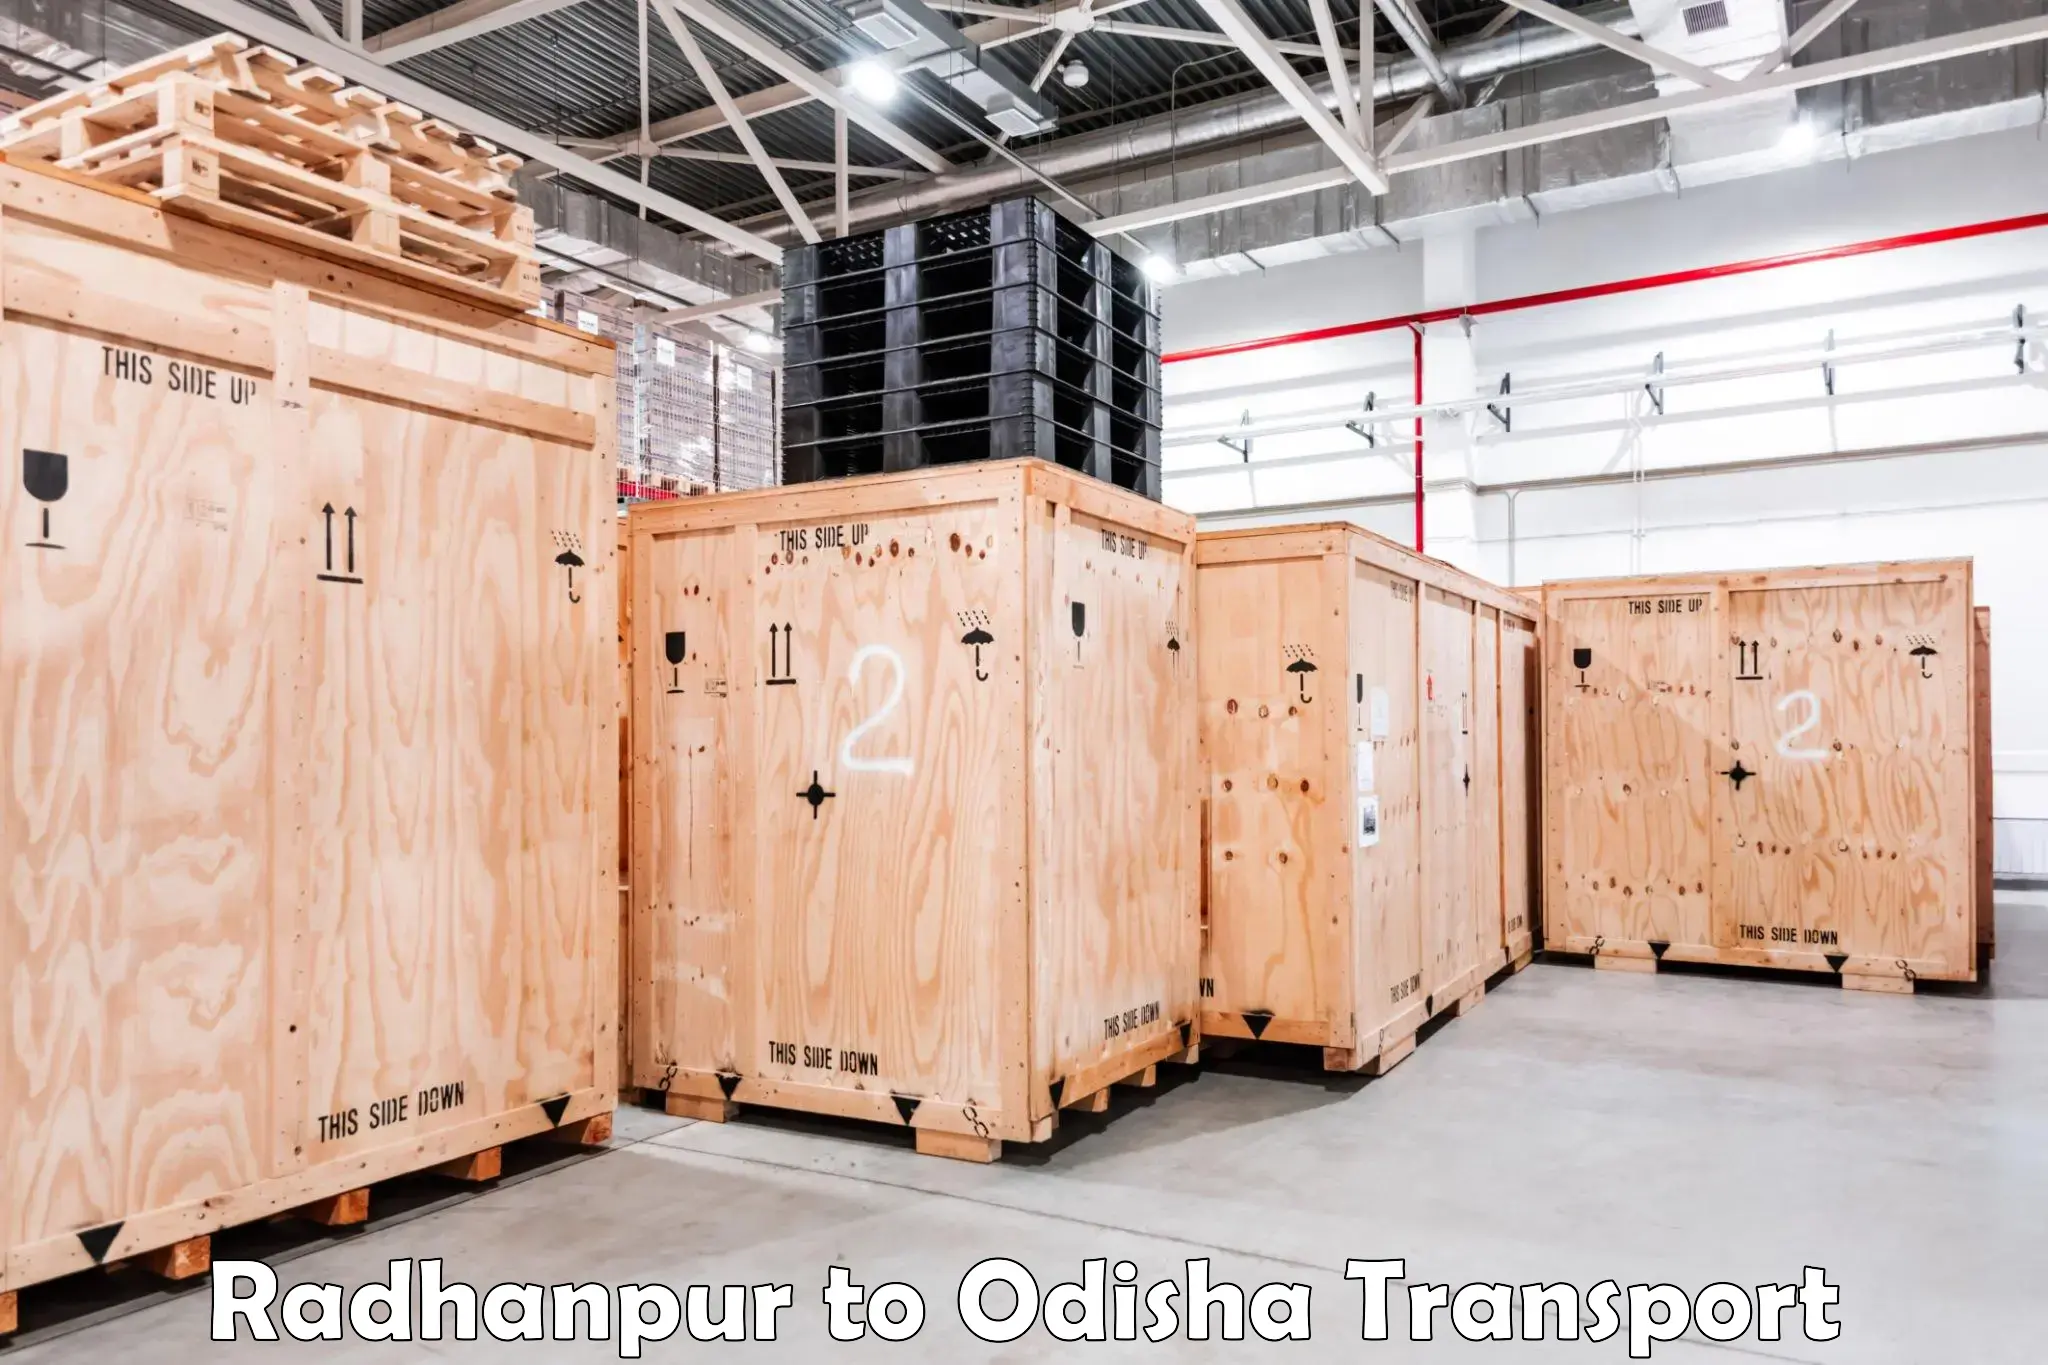 Truck transport companies in India Radhanpur to Chandikhol